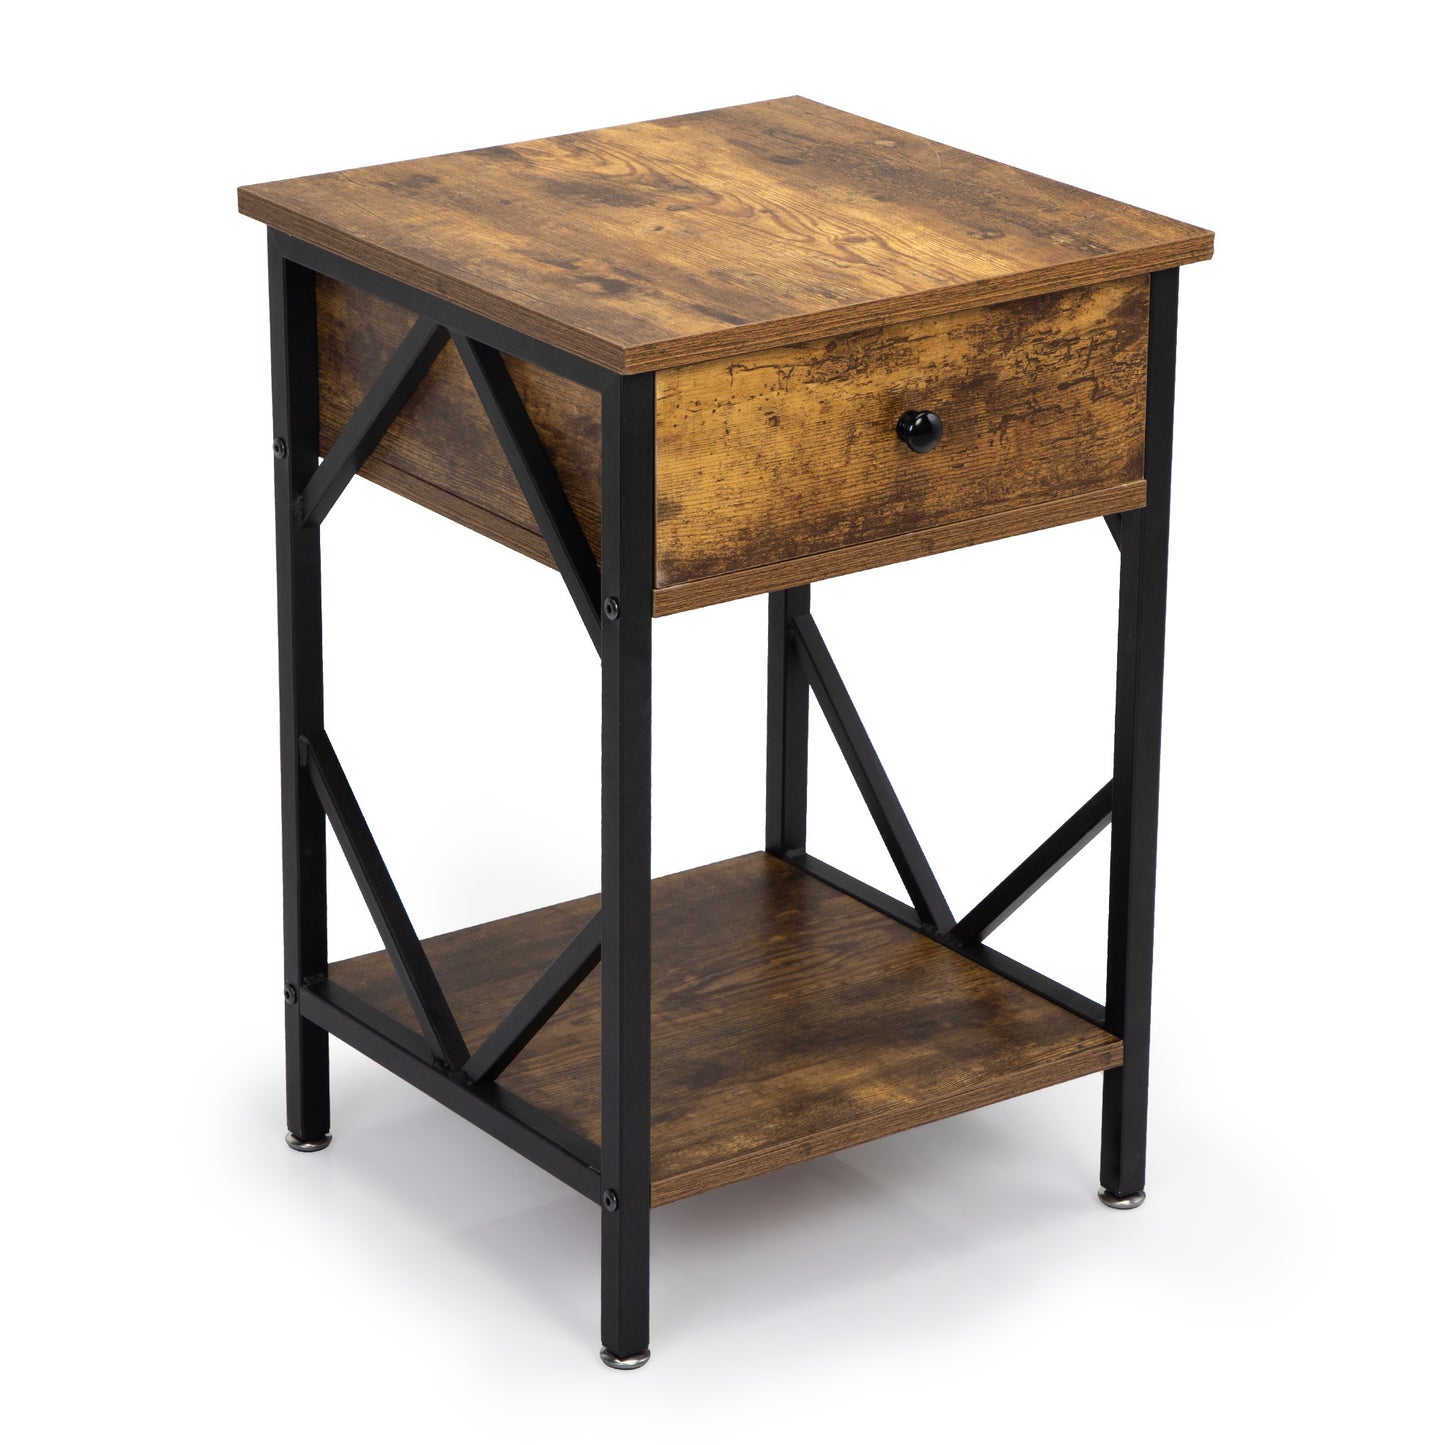 Set of 2 Nightstand Industrial End Table with Drawer